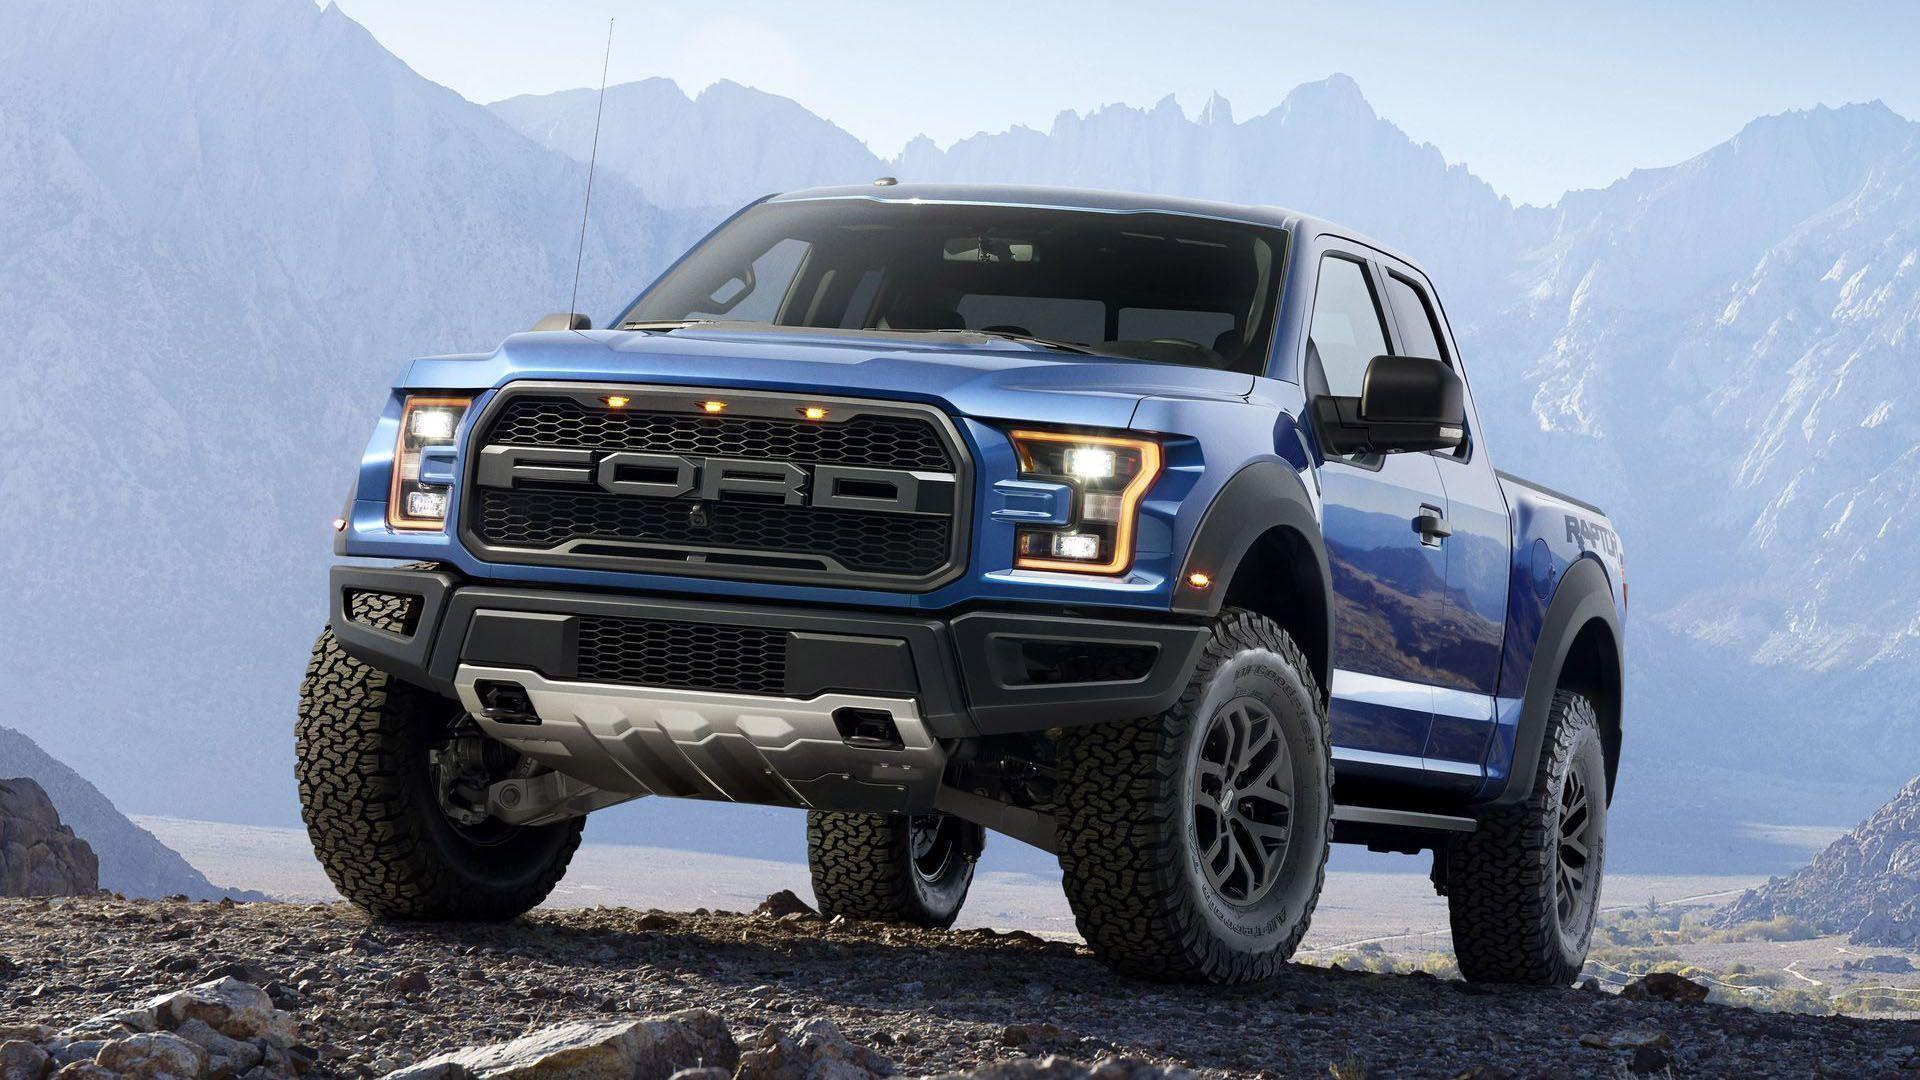 2017 Ford® F-150 Truck | Built Ford Tough® | Ford.ca